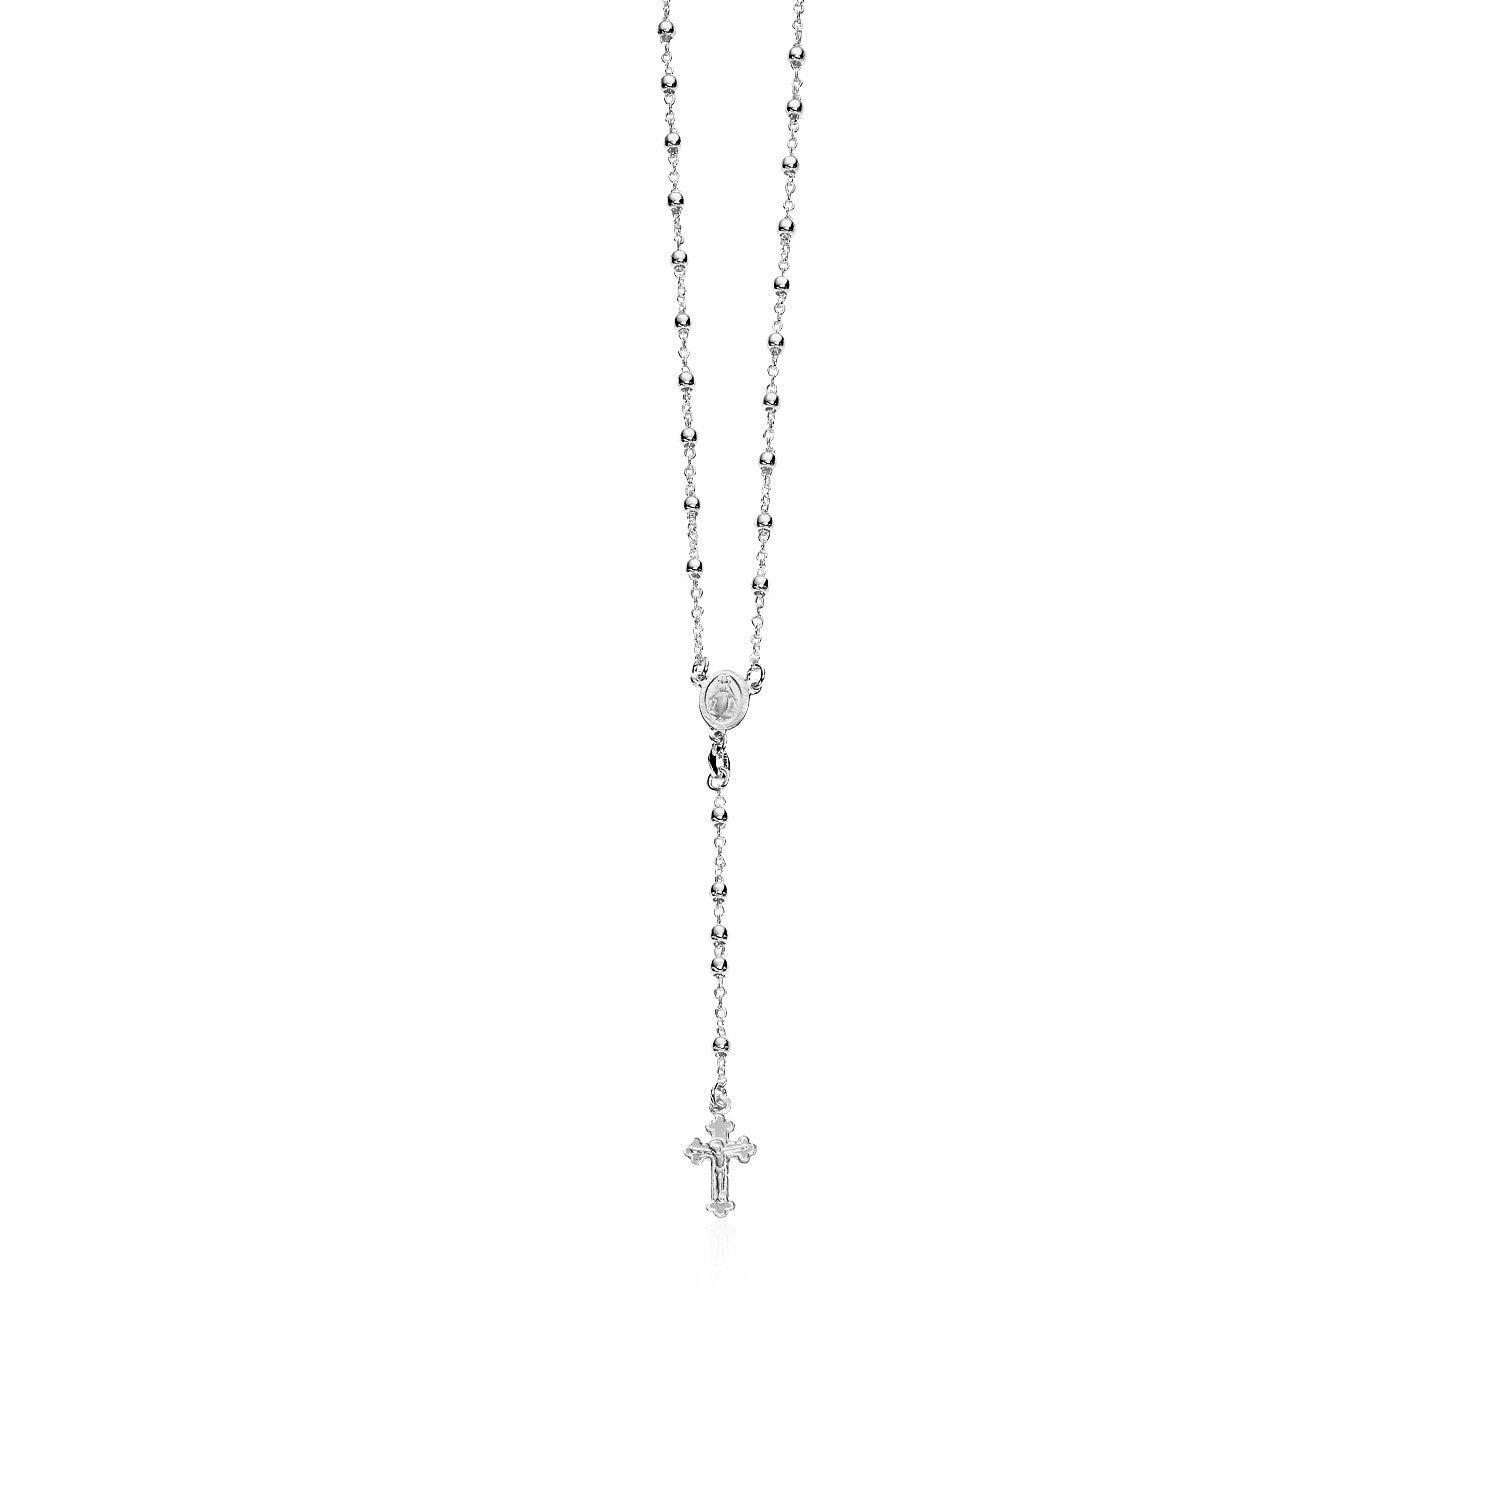 Fine Rosary Chain and Bead Necklace in Sterling Silver, size 26''